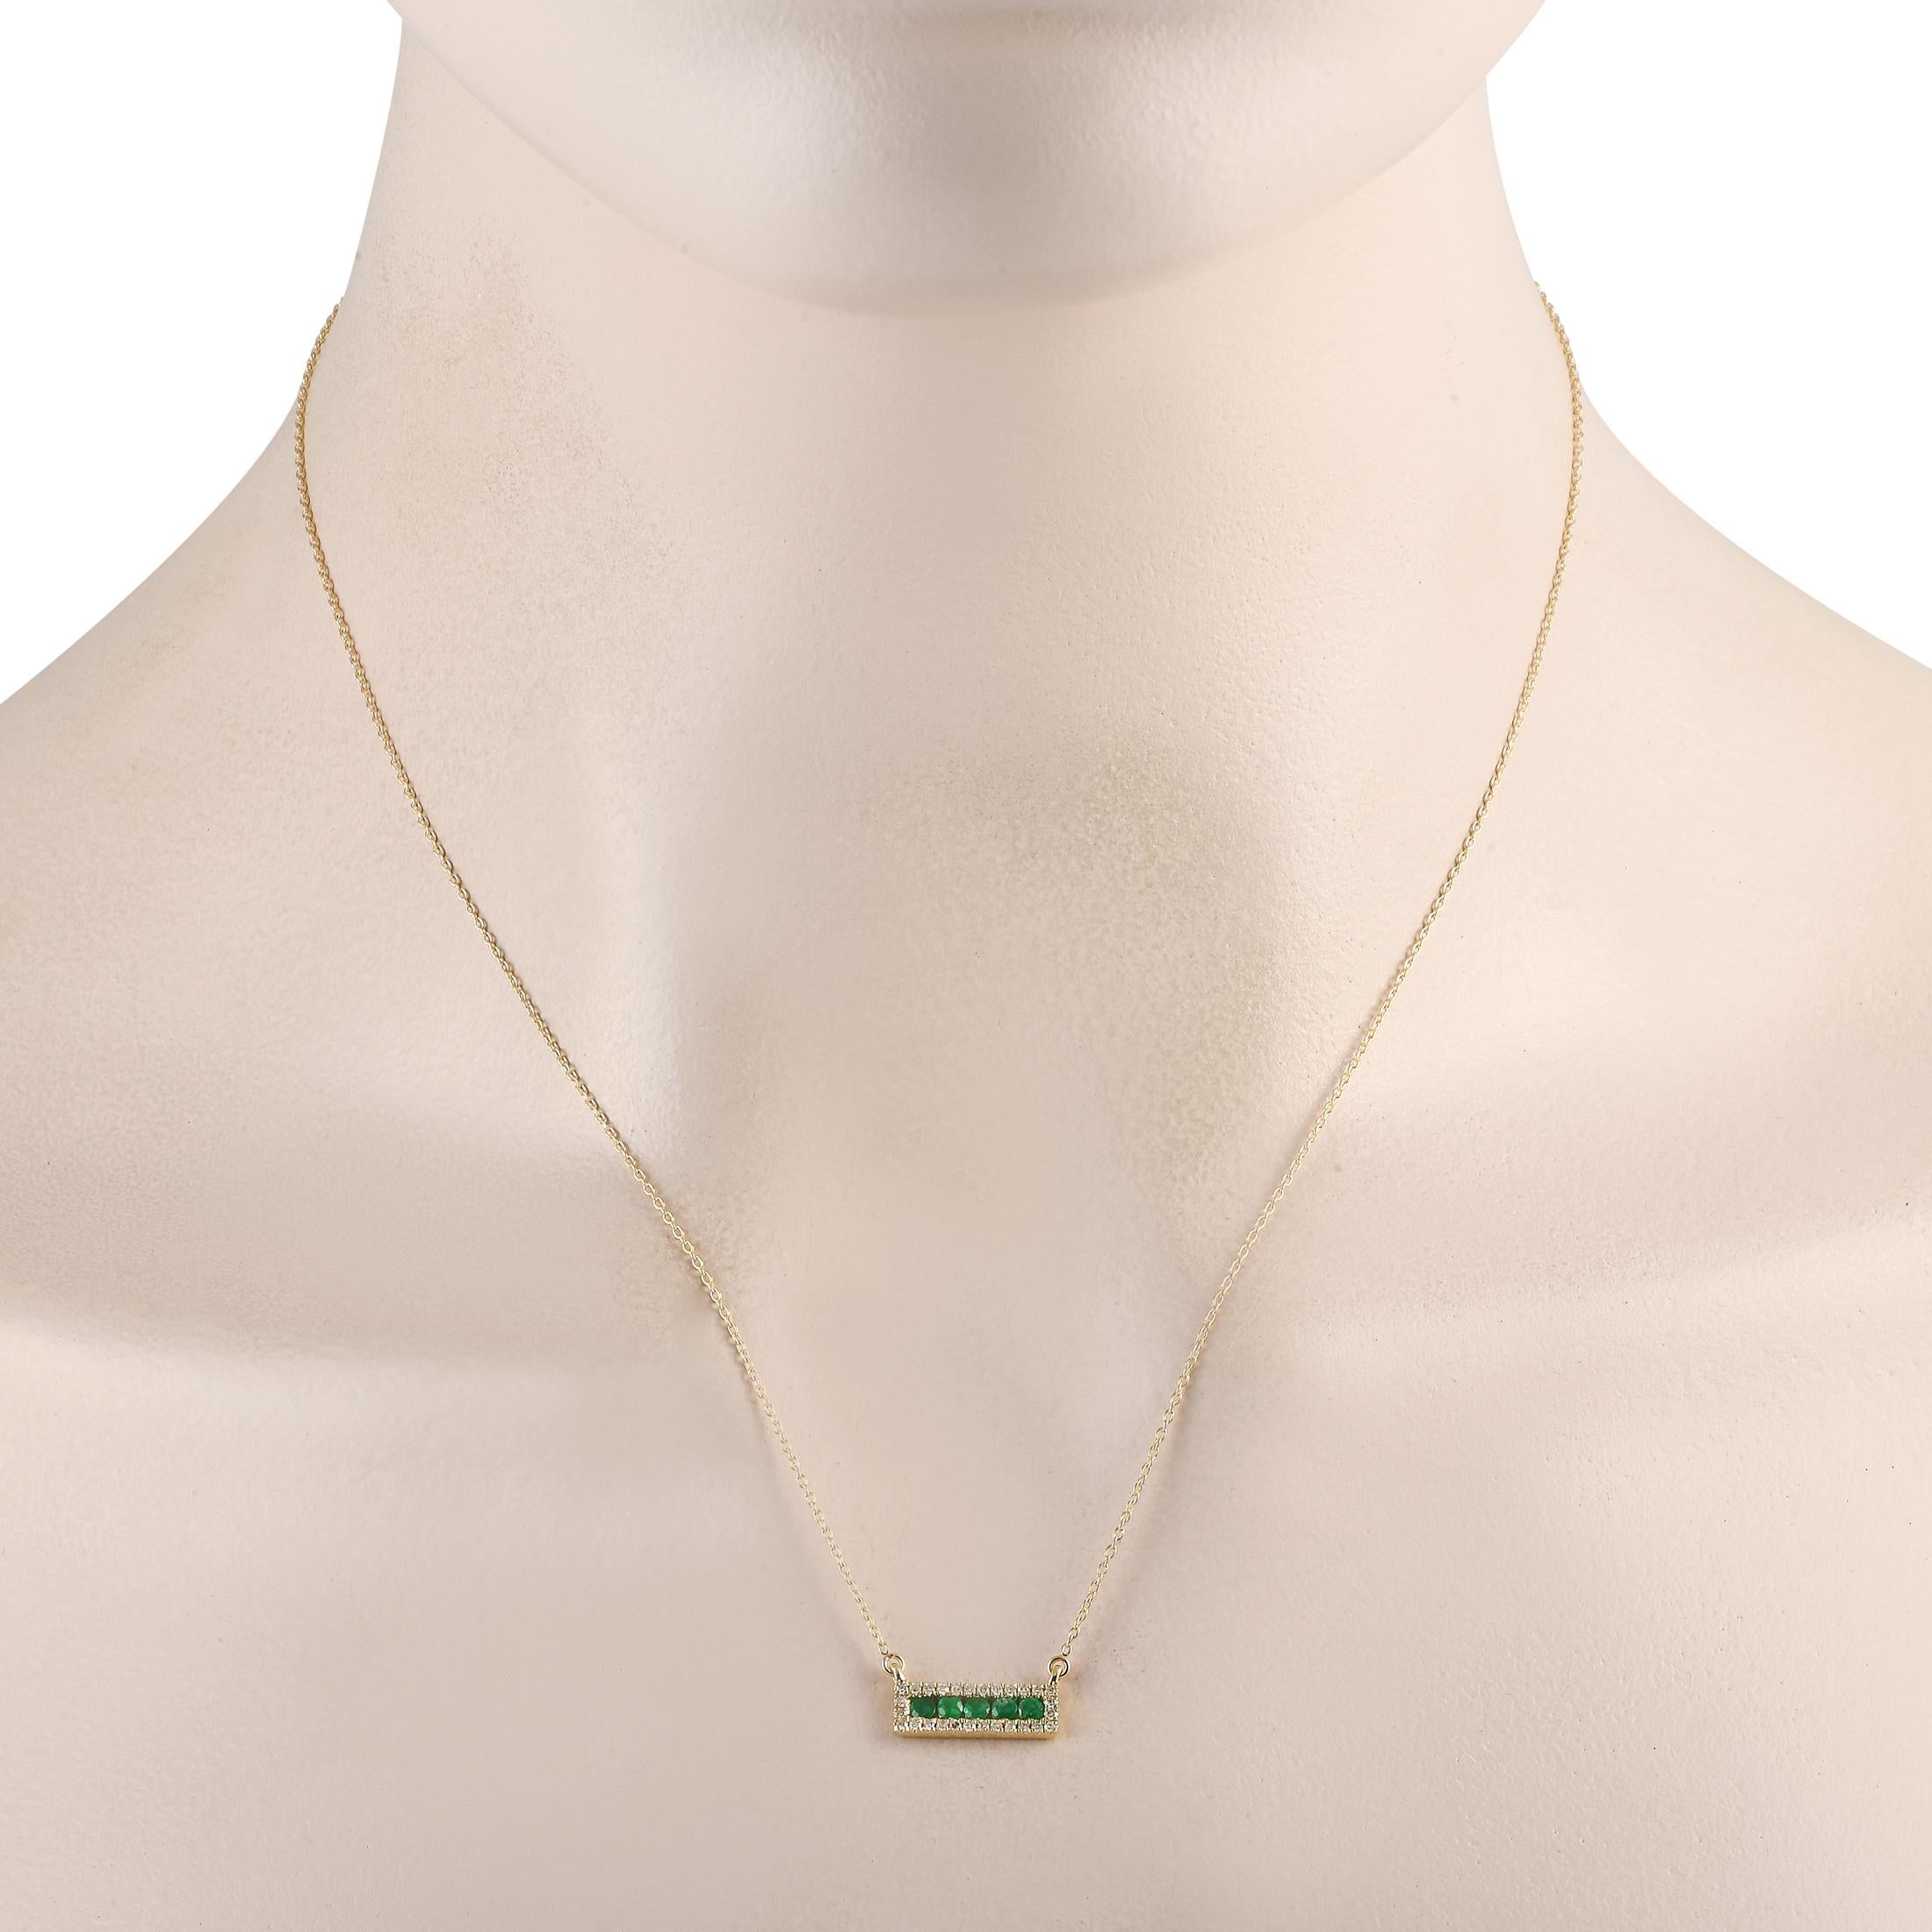 Add a touch of luxury to any ensemble with this impeccably crafted necklace. Suspended at the center of an 18 chain, youll find a 14K Yellow Gold pendant measuring 0.15 long by 0.65 wide. A series of Emeralds elevate the center, while sparkling